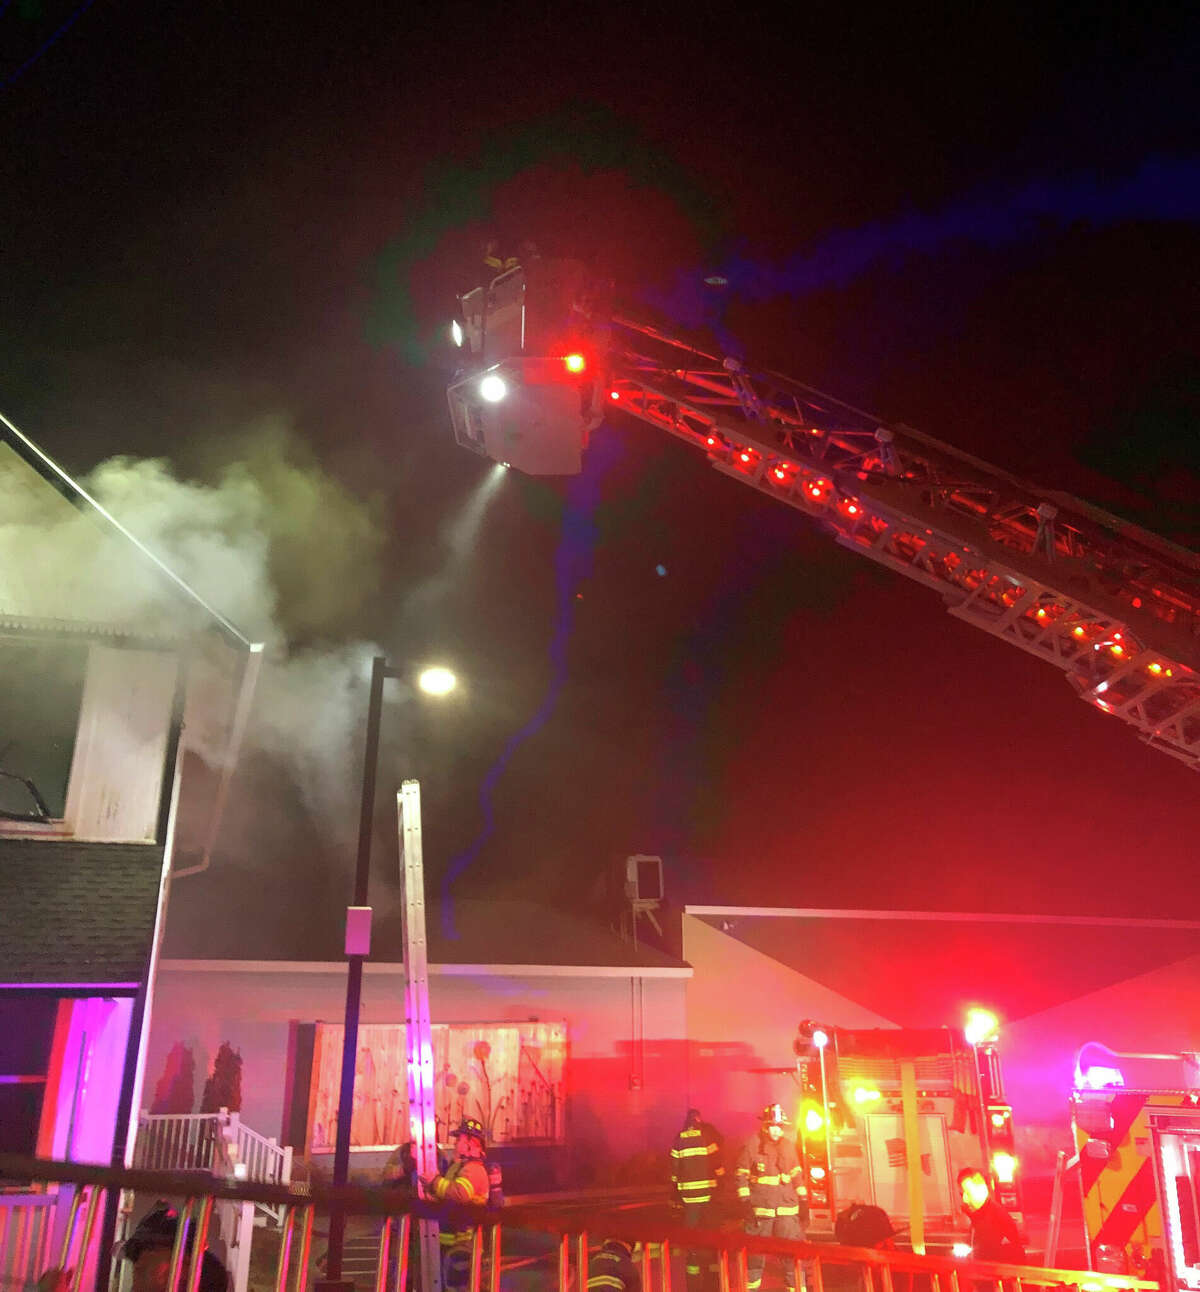 A fire heavily damaged a historic house that served as Madison's original post office, owned by the neighboring E.C. Scranton Memorial Library, Monday evening, according to officials.